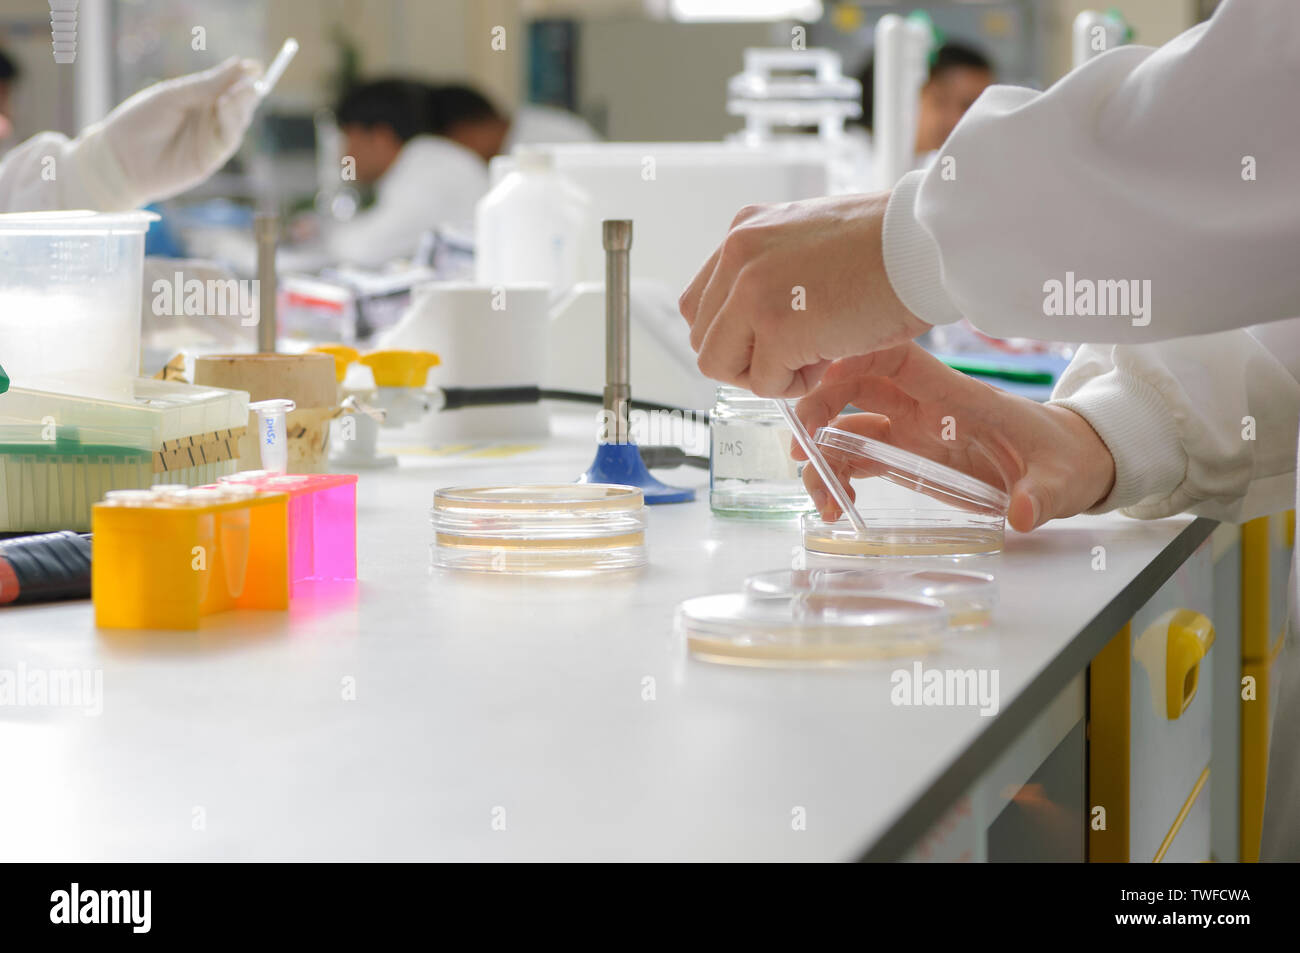 Worktop height viewpoint of a science laboratory workbench with a pair of ungloved hands in the foreground preparing a petri dish. Stock Photo